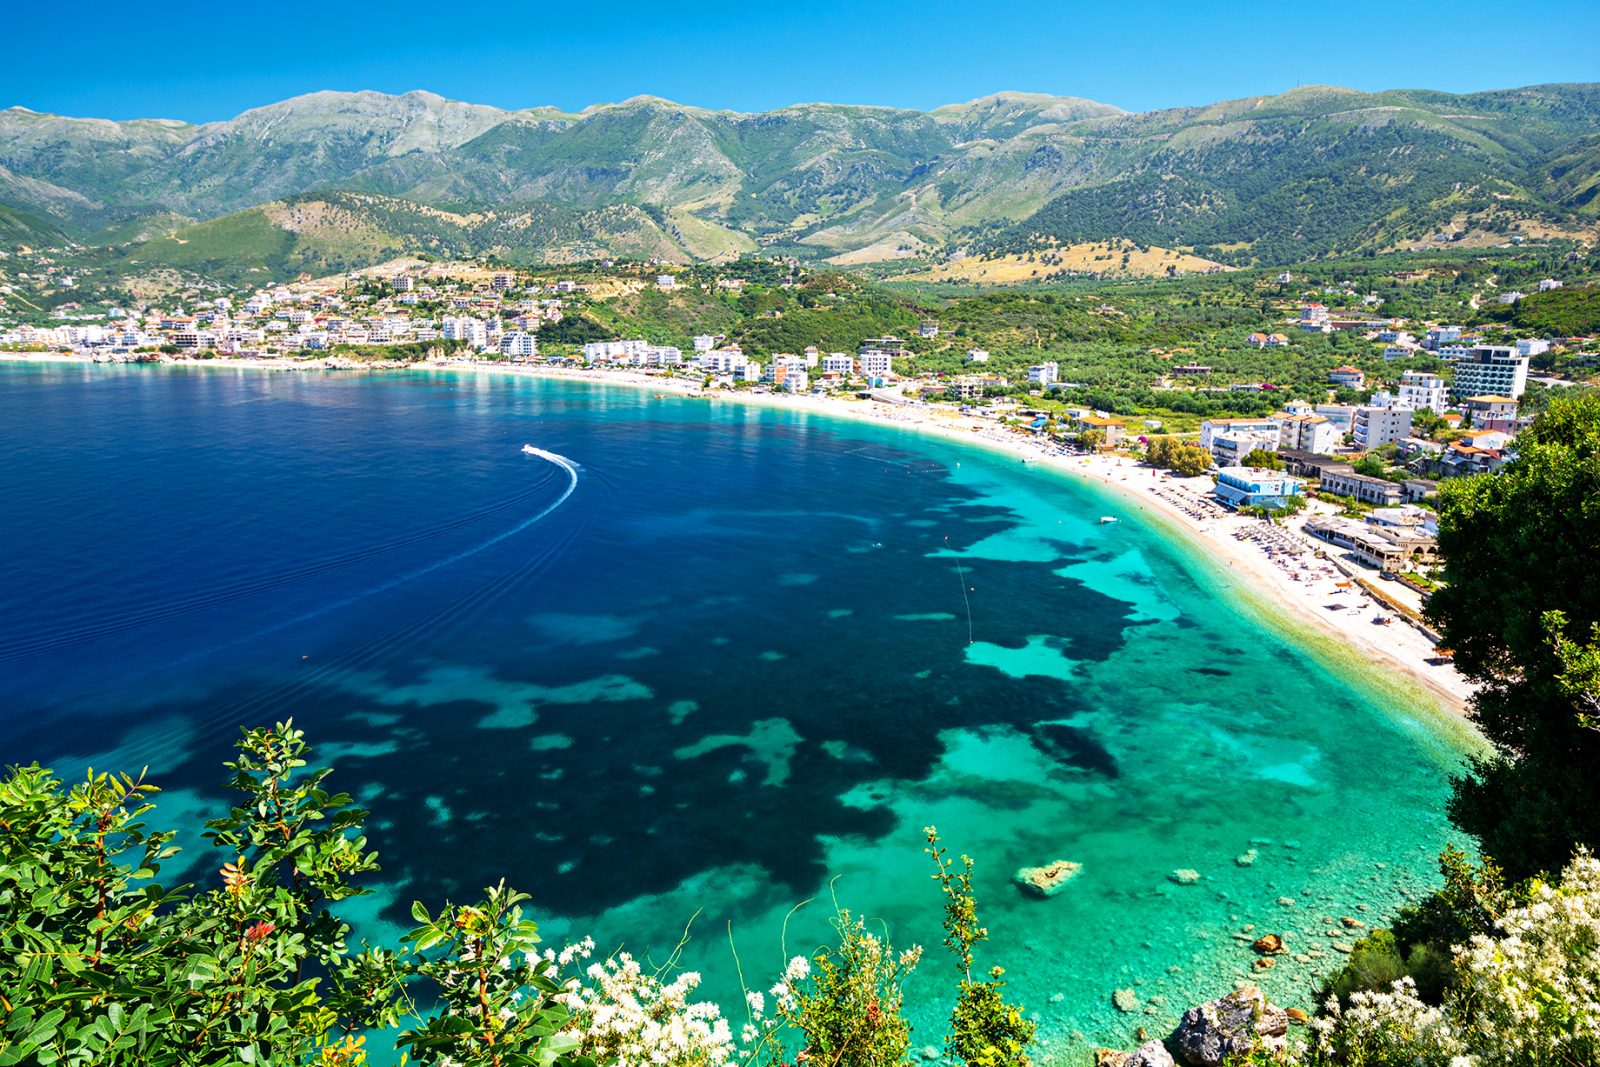 Can You Actually Get at Least 15/20 on This Quiz That’s All About Europe? Albanian Rivieria Adriatic Sea Himare, Albania